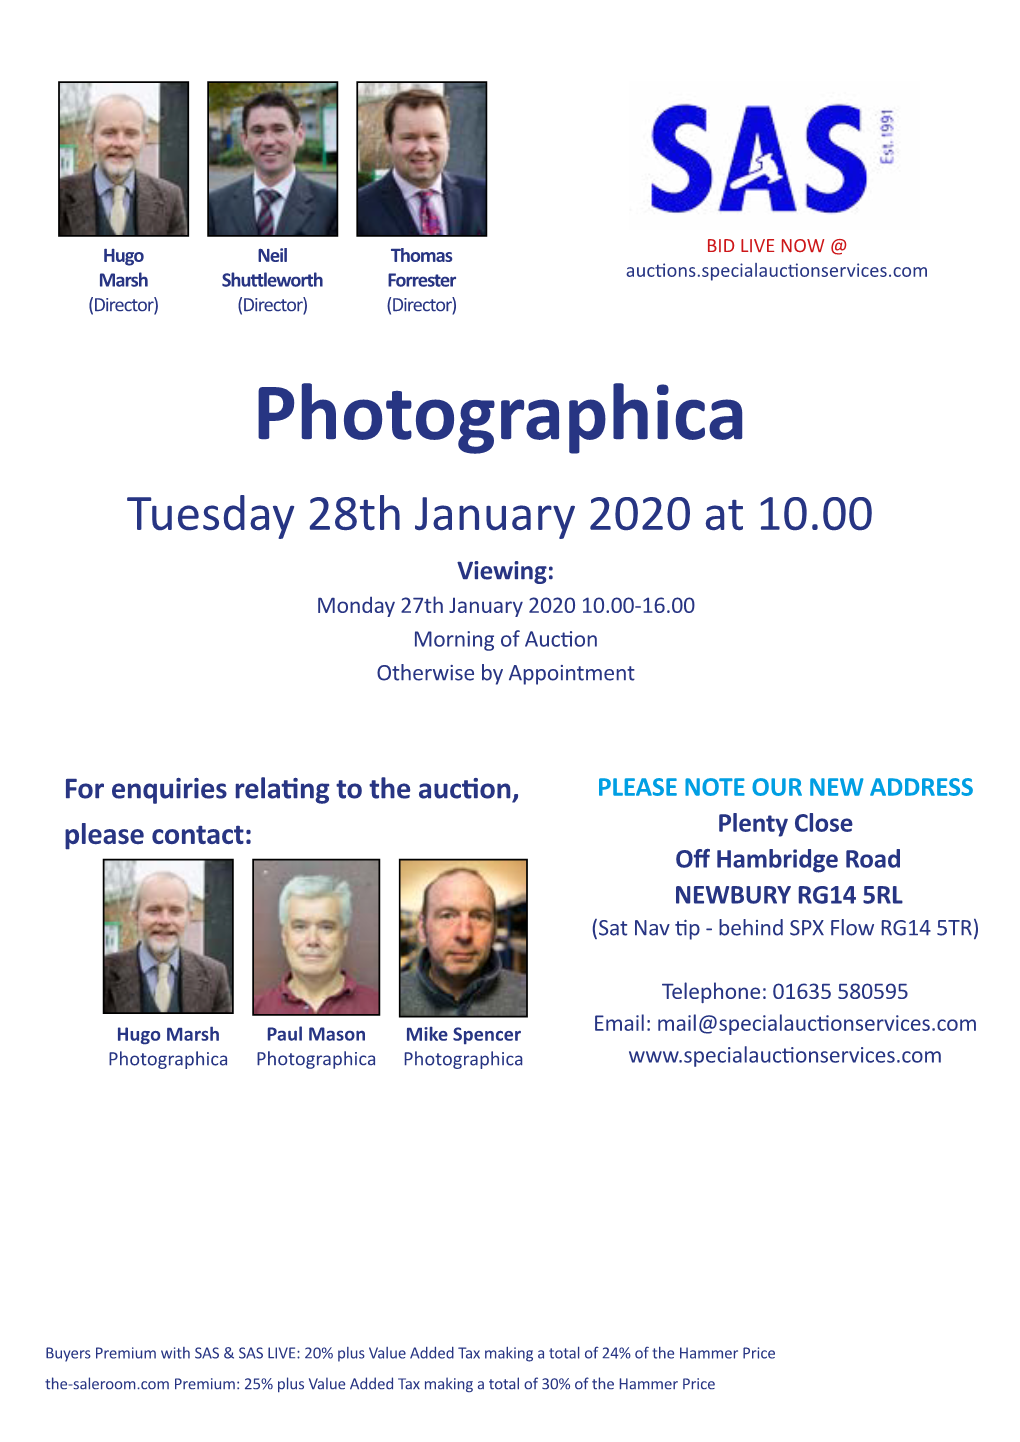 Photographica Tuesday 28Th January 2020 at 10.00 Viewing: Monday 27Th January 2020 10.00-16.00 Morning of Auction Otherwise by Appointment